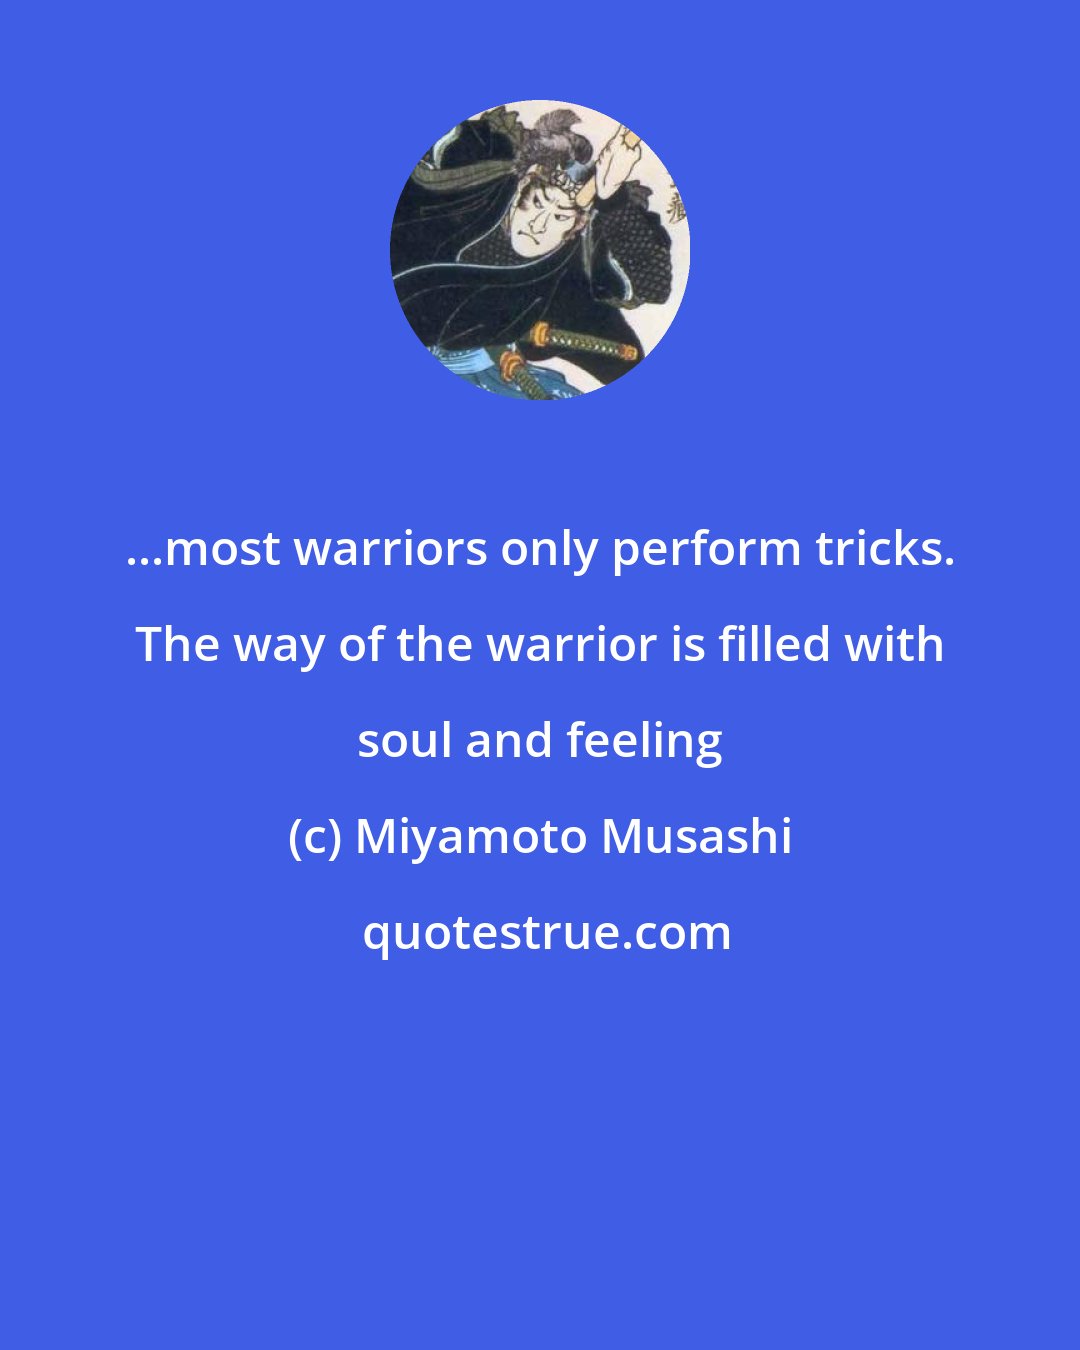 Miyamoto Musashi: ...most warriors only perform tricks. The way of the warrior is filled with soul and feeling